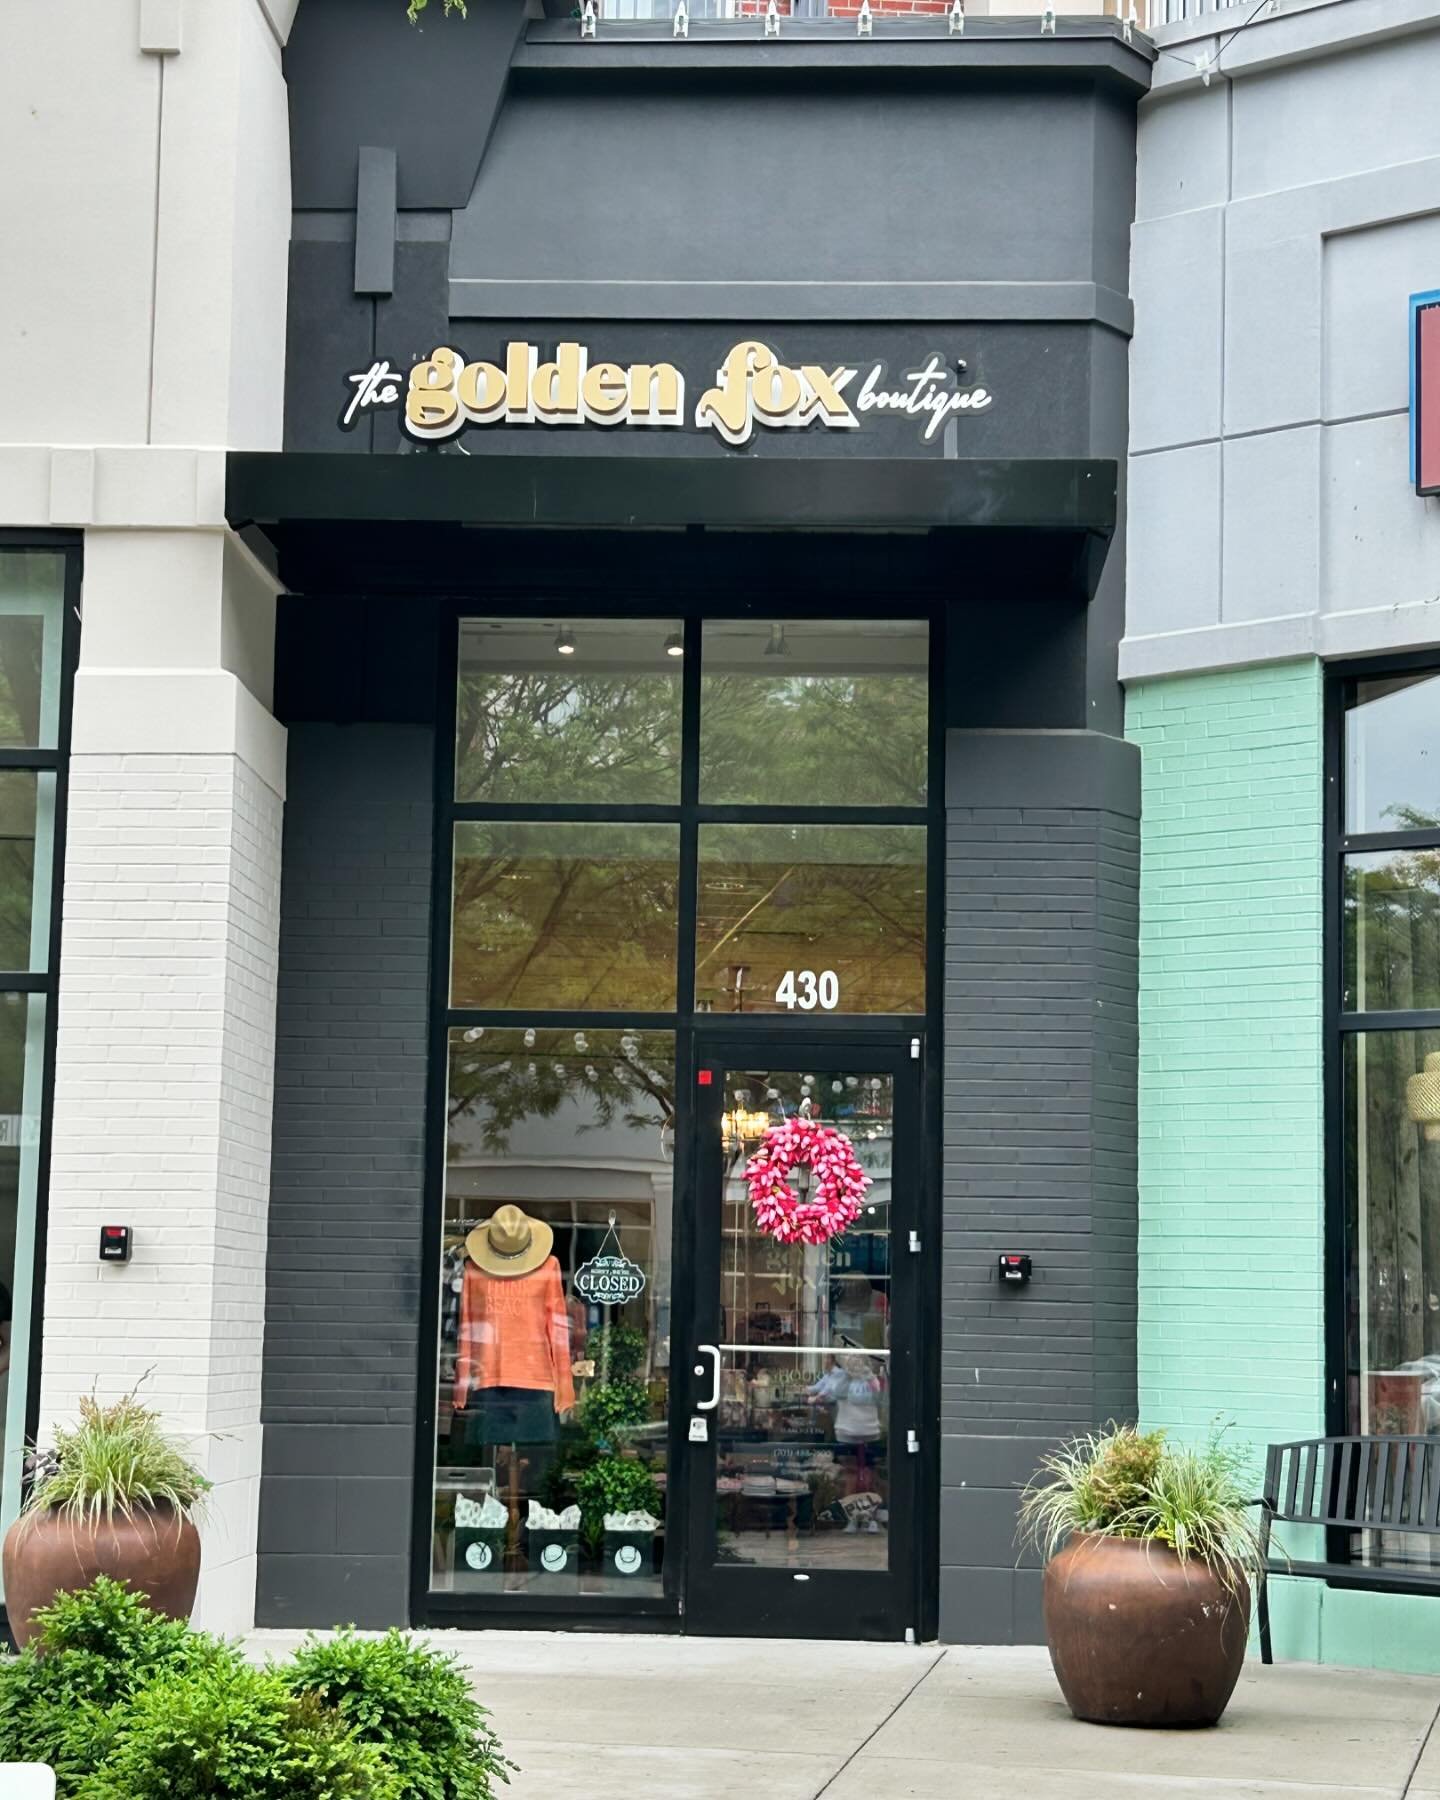 Sign is up and we are open! Come by and see us. Open til 6pm @thecrossingclarendon. 

#shoplocal #shopsmall #shoparl #boutiqueshopping #clarendonva #giftsgalore